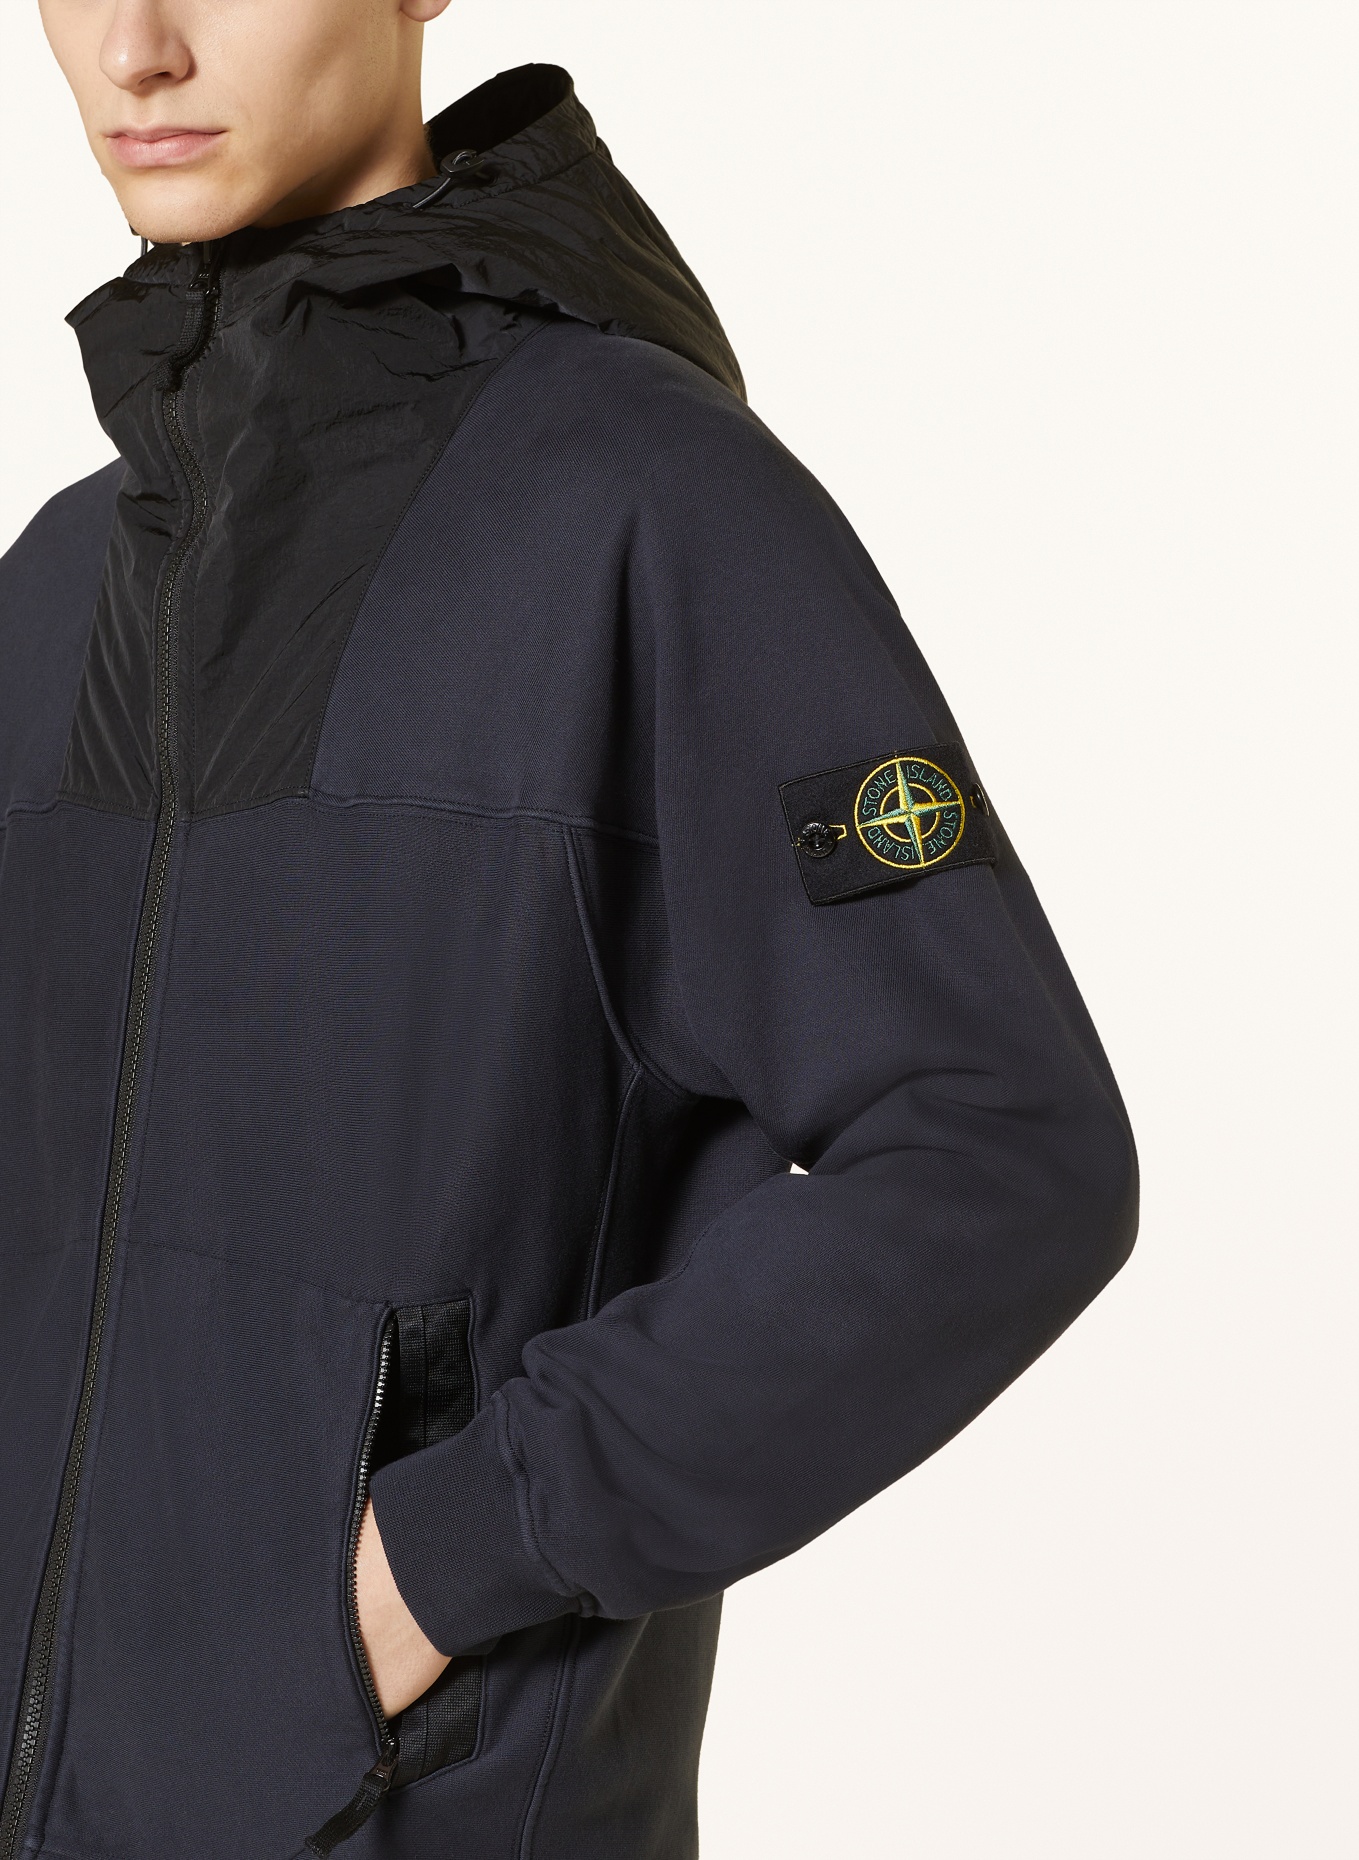 STONE ISLAND Sweat jacket in mixed materials, Color: DARK BLUE/ BLACK (Image 5)